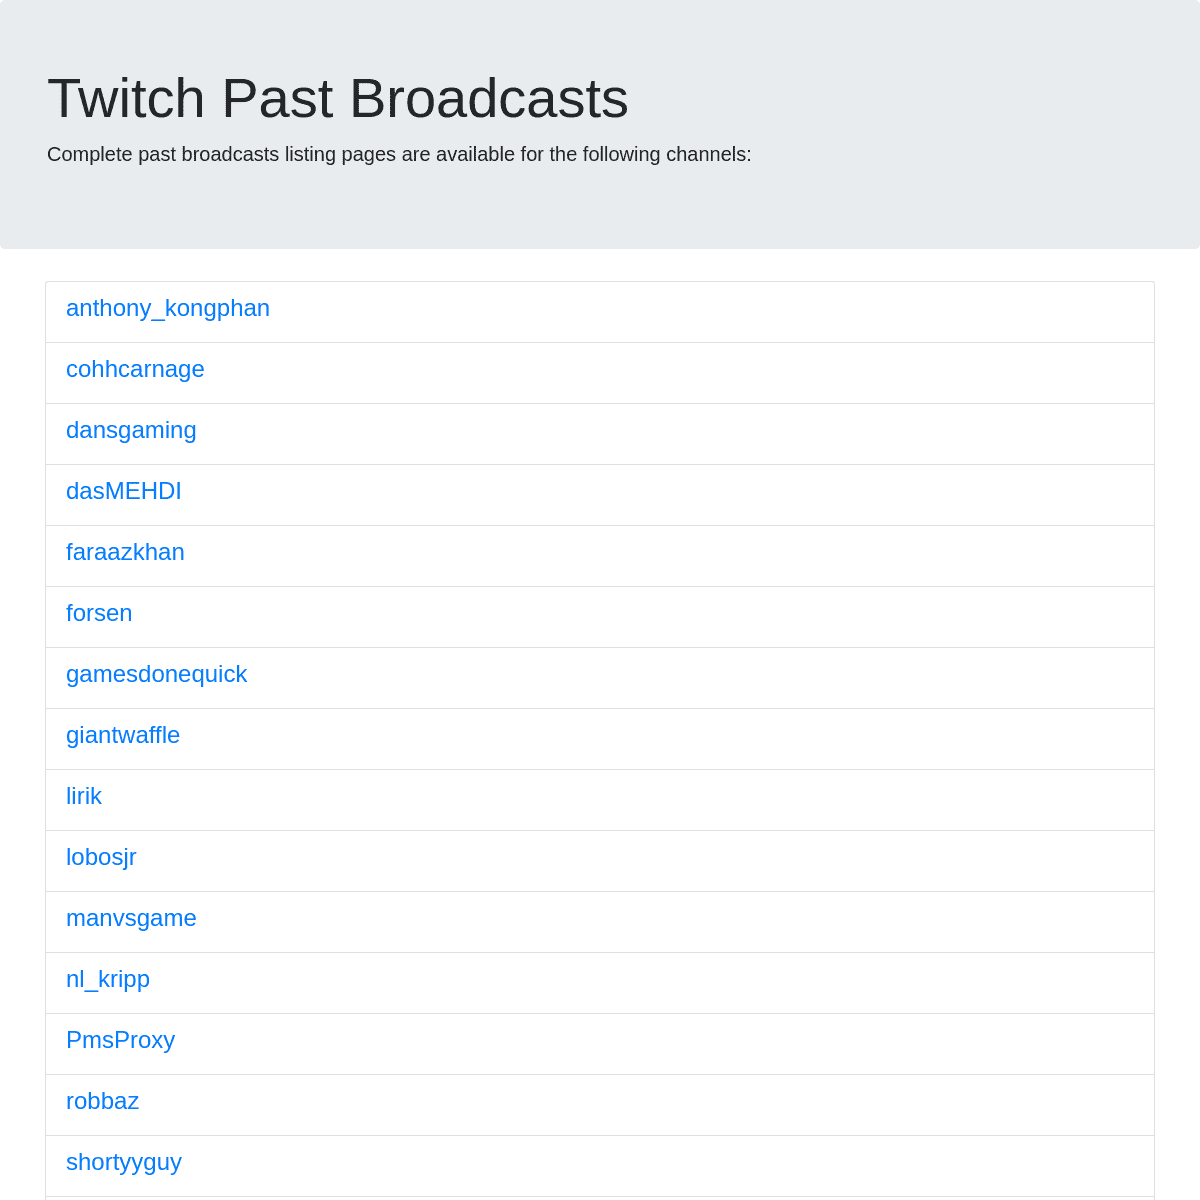 Twitch Past Broadcasts